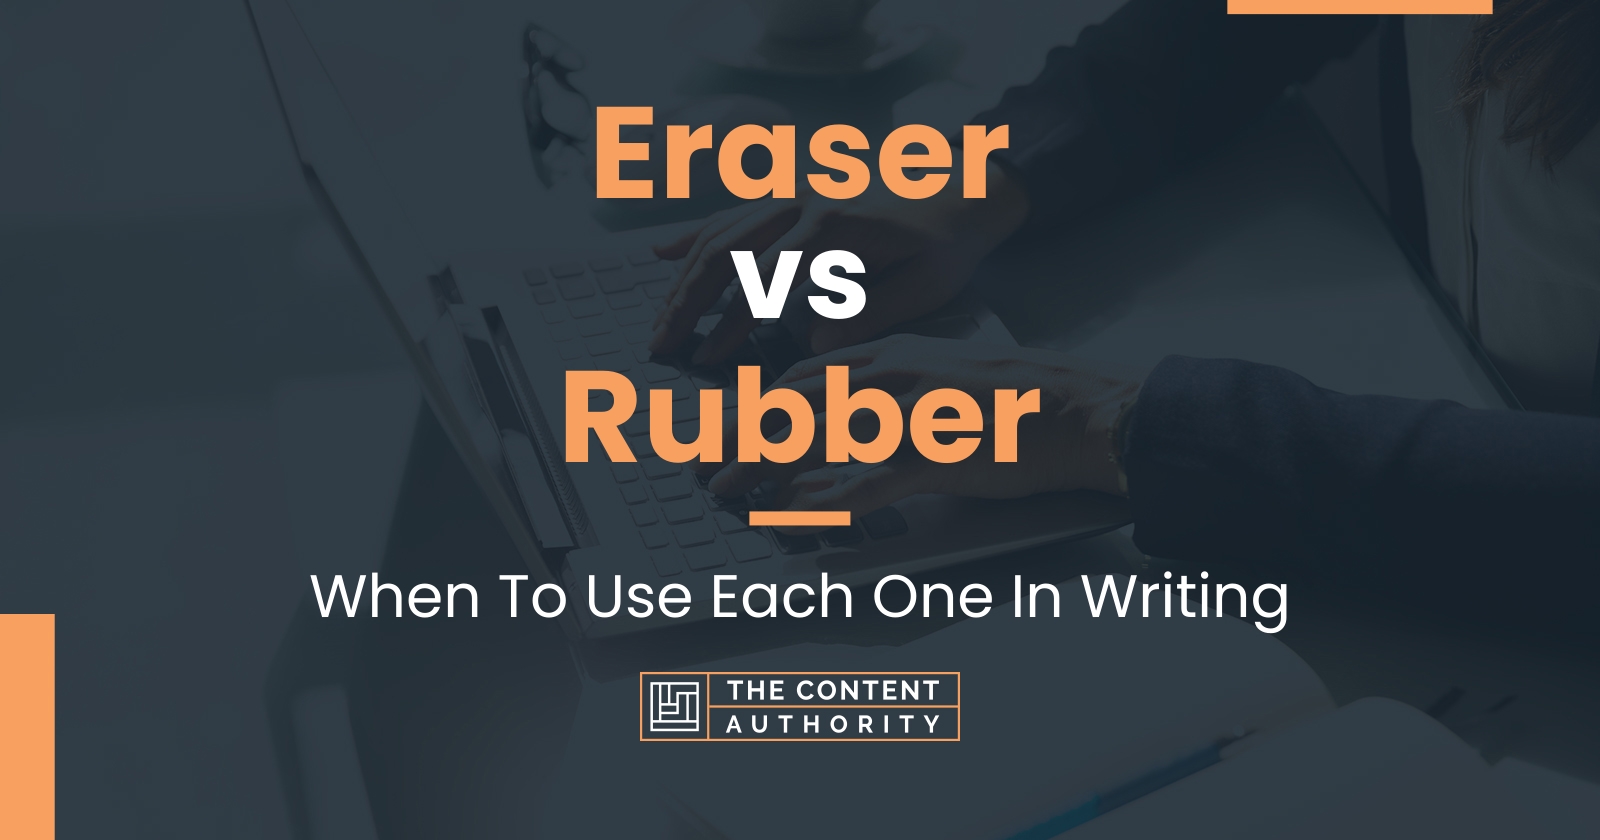 Eraser vs Rubber: When To Use Each One In Writing